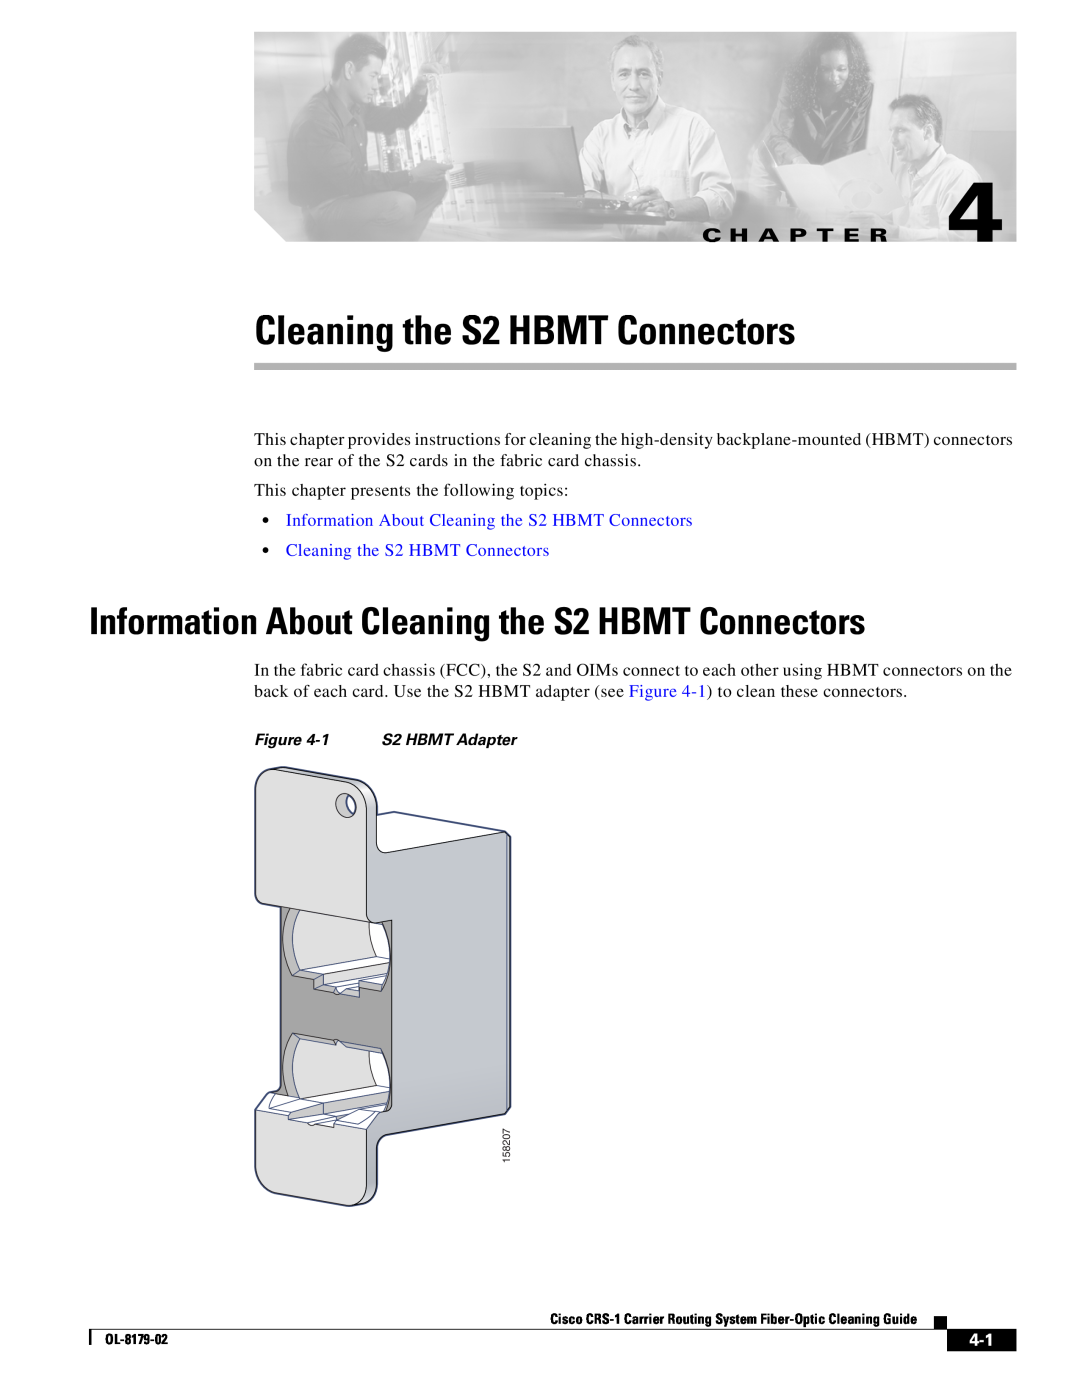 Cisco Systems CRS-1 Information About Cleaning the S2 HBMT Connectors, •Cleaning the S2 HBMT Connectors, C H A P T E R 